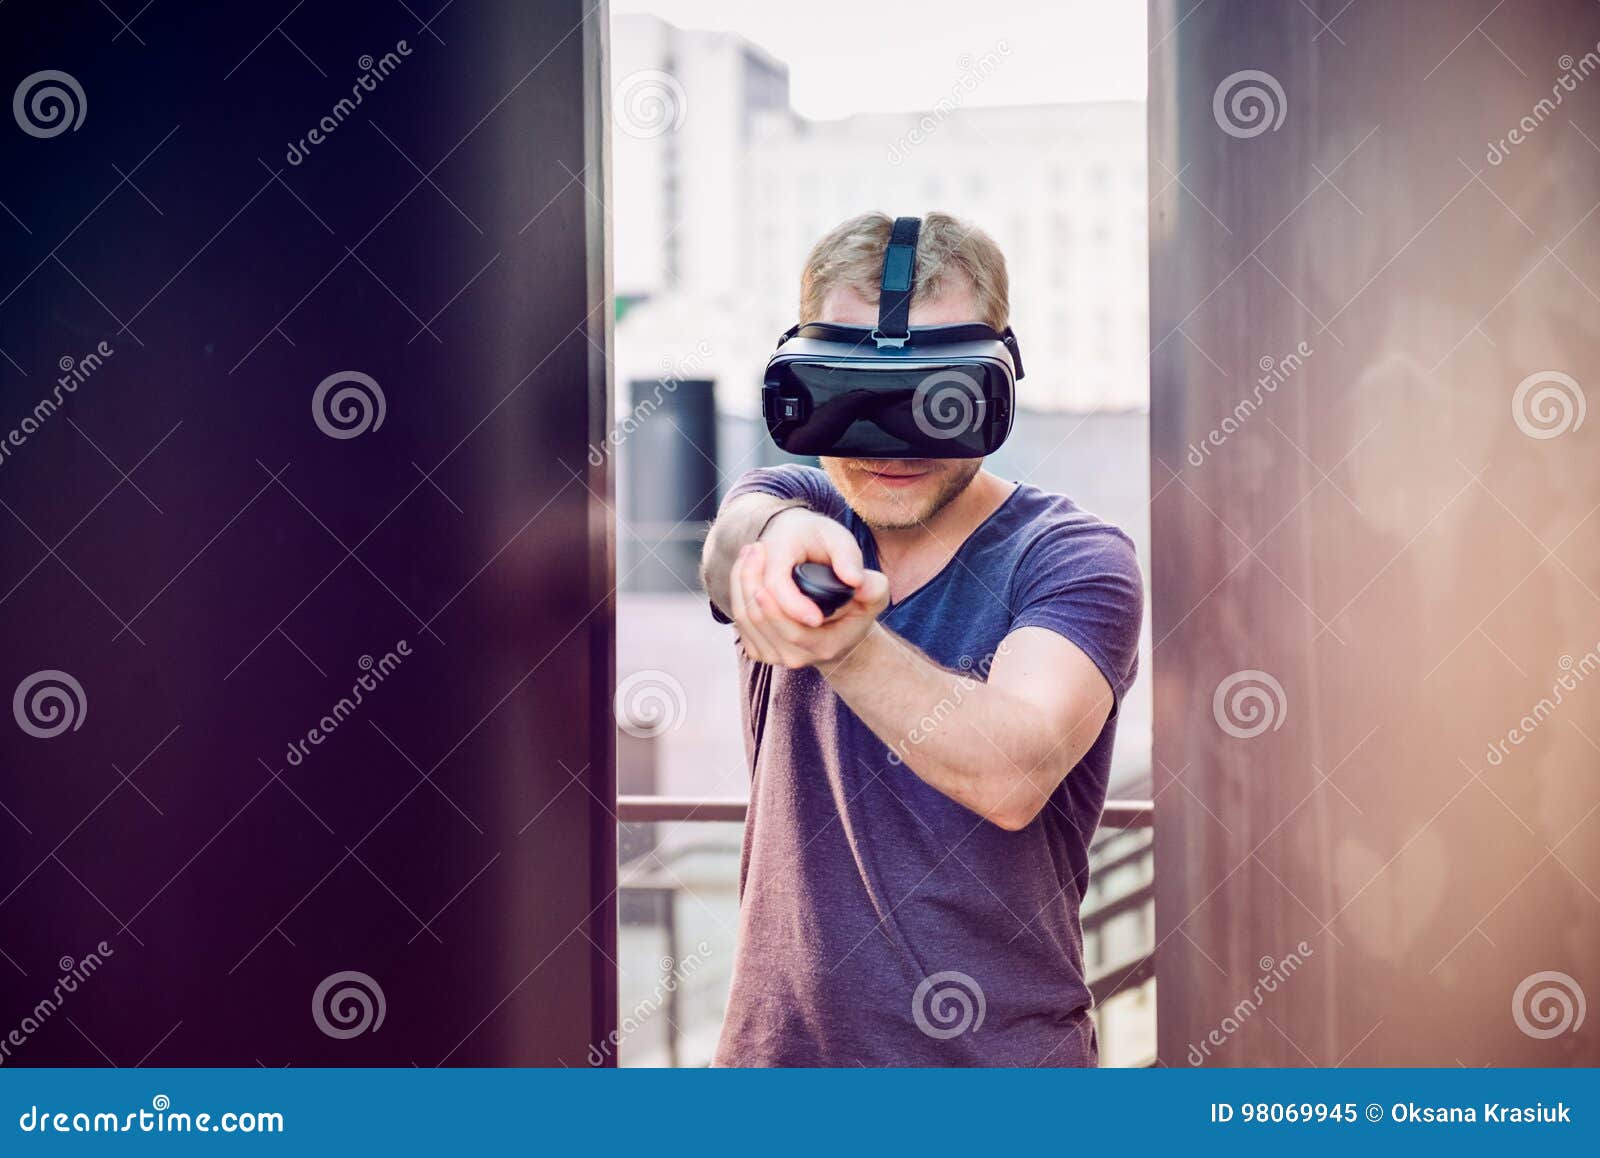 Young Man Playing Shooting Games in Virtual Reality Headset on the Urban Building Background Outdoors